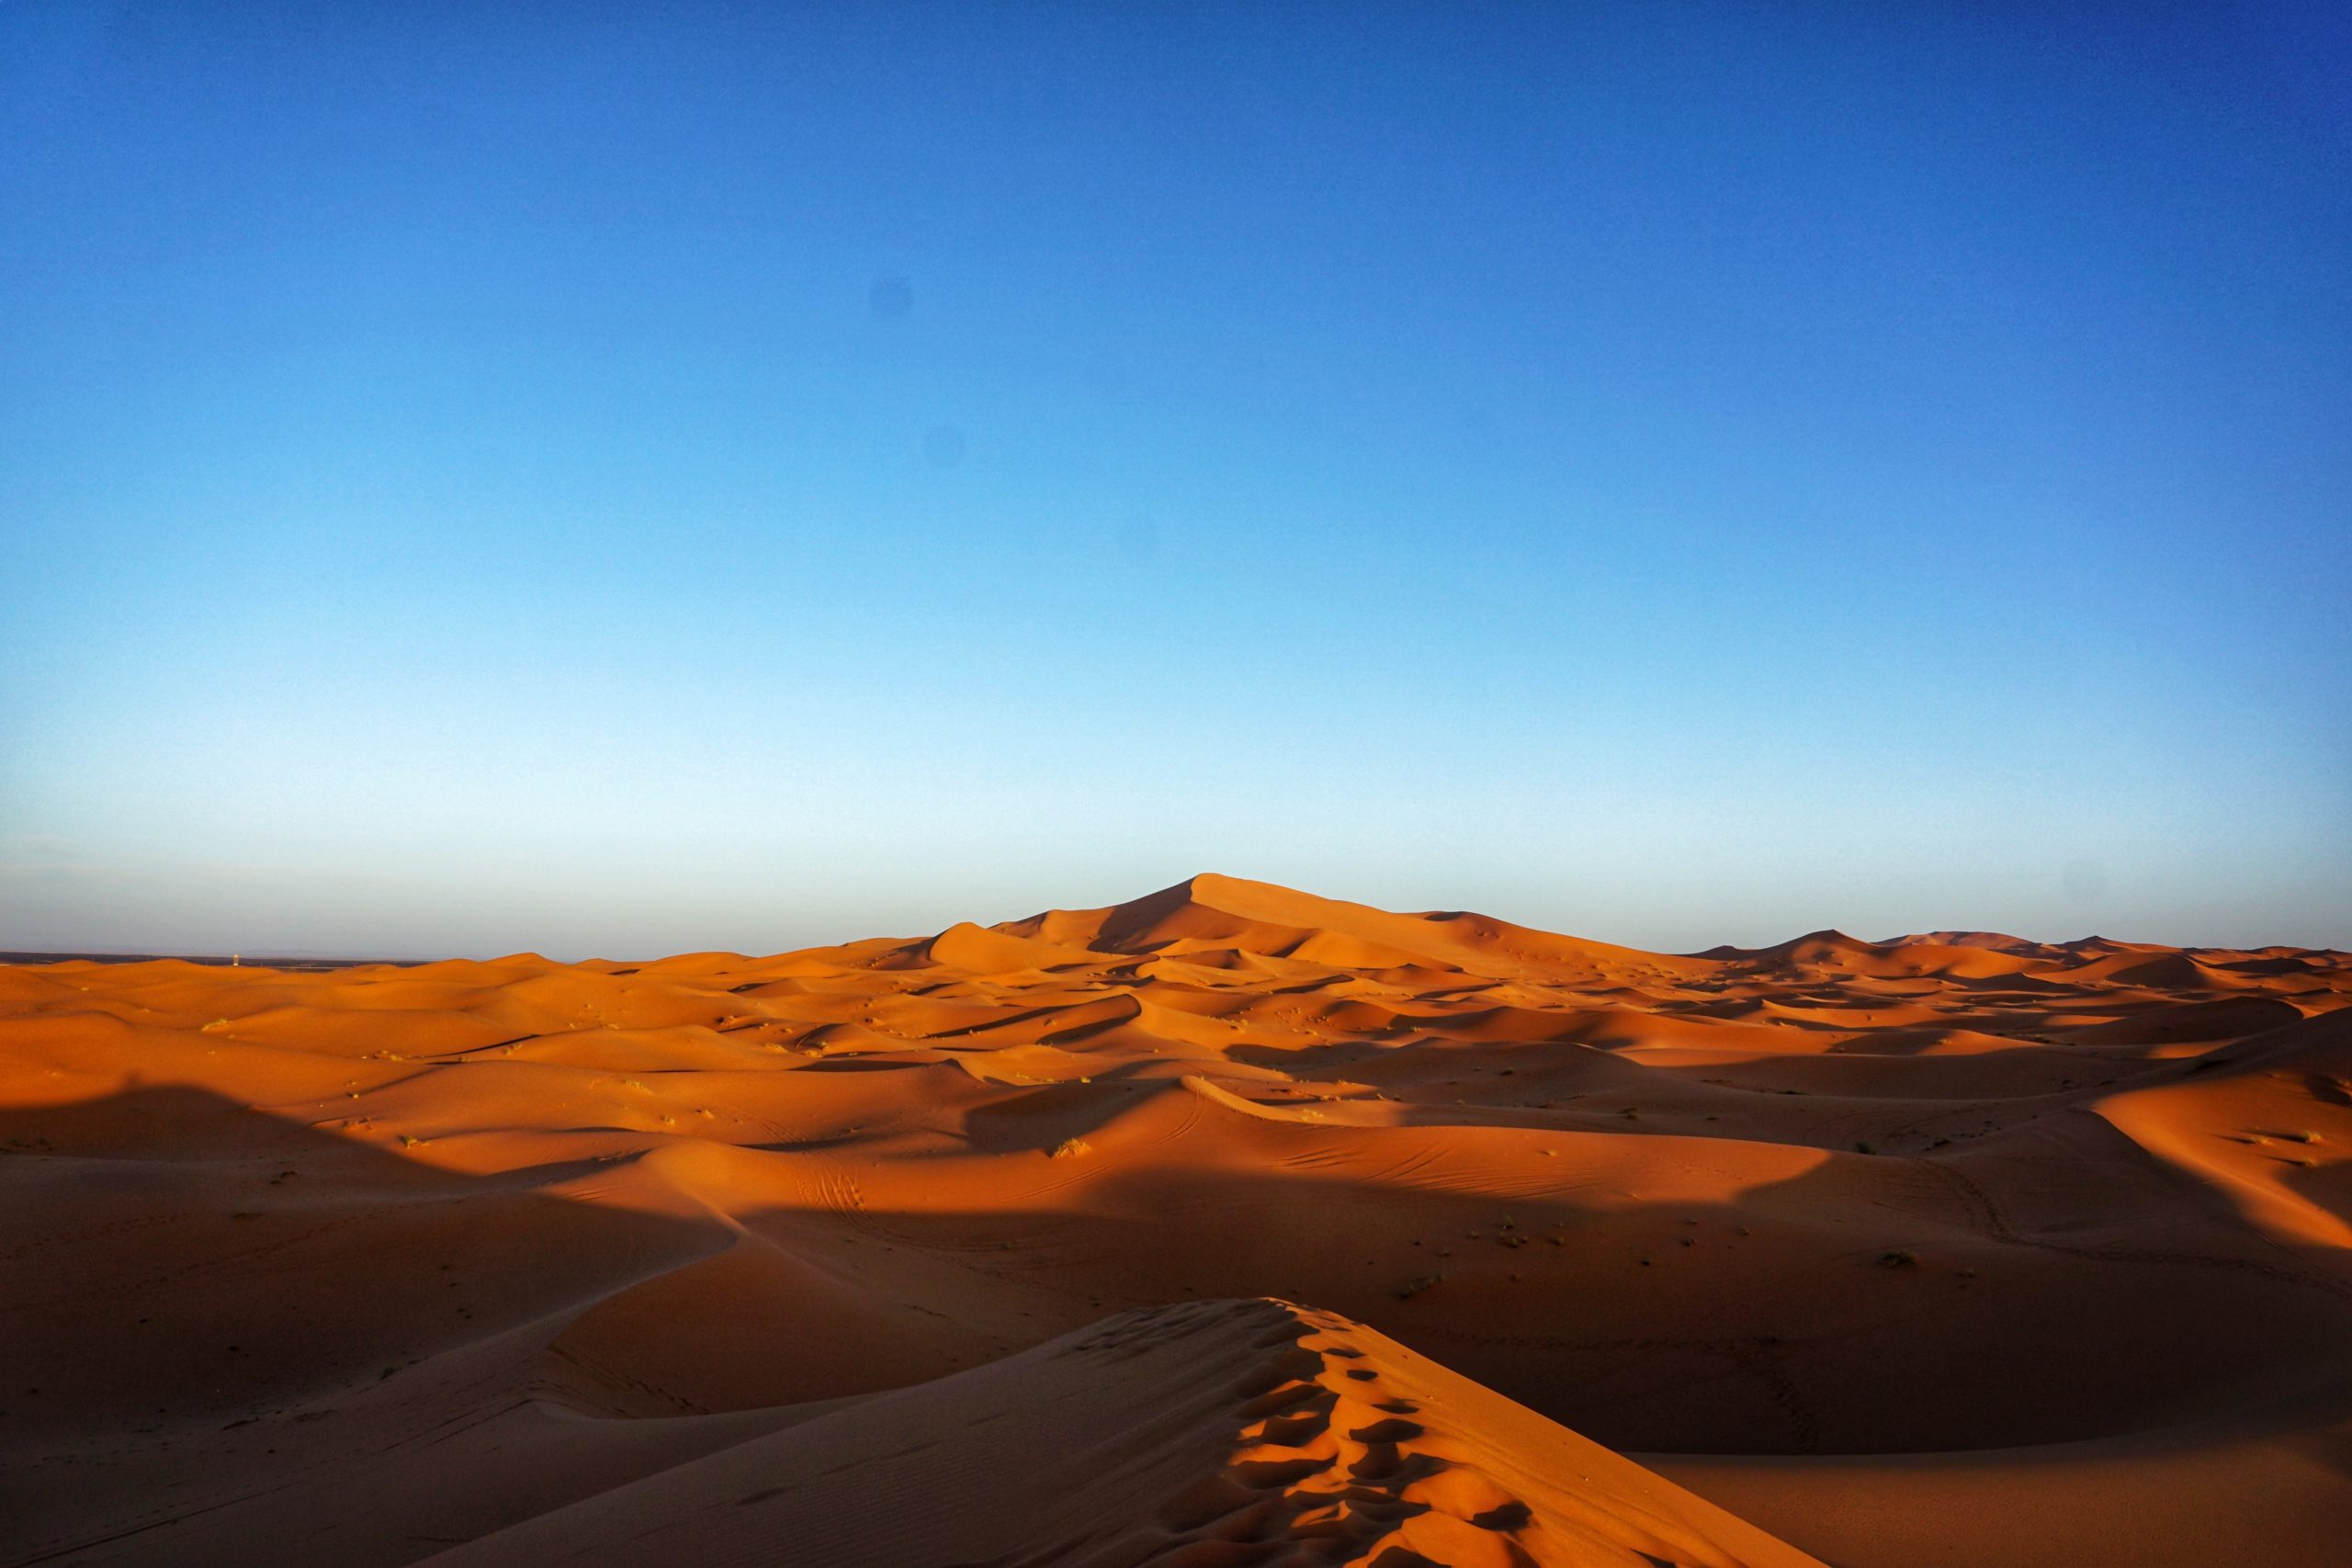 Malware can't survive in this desert